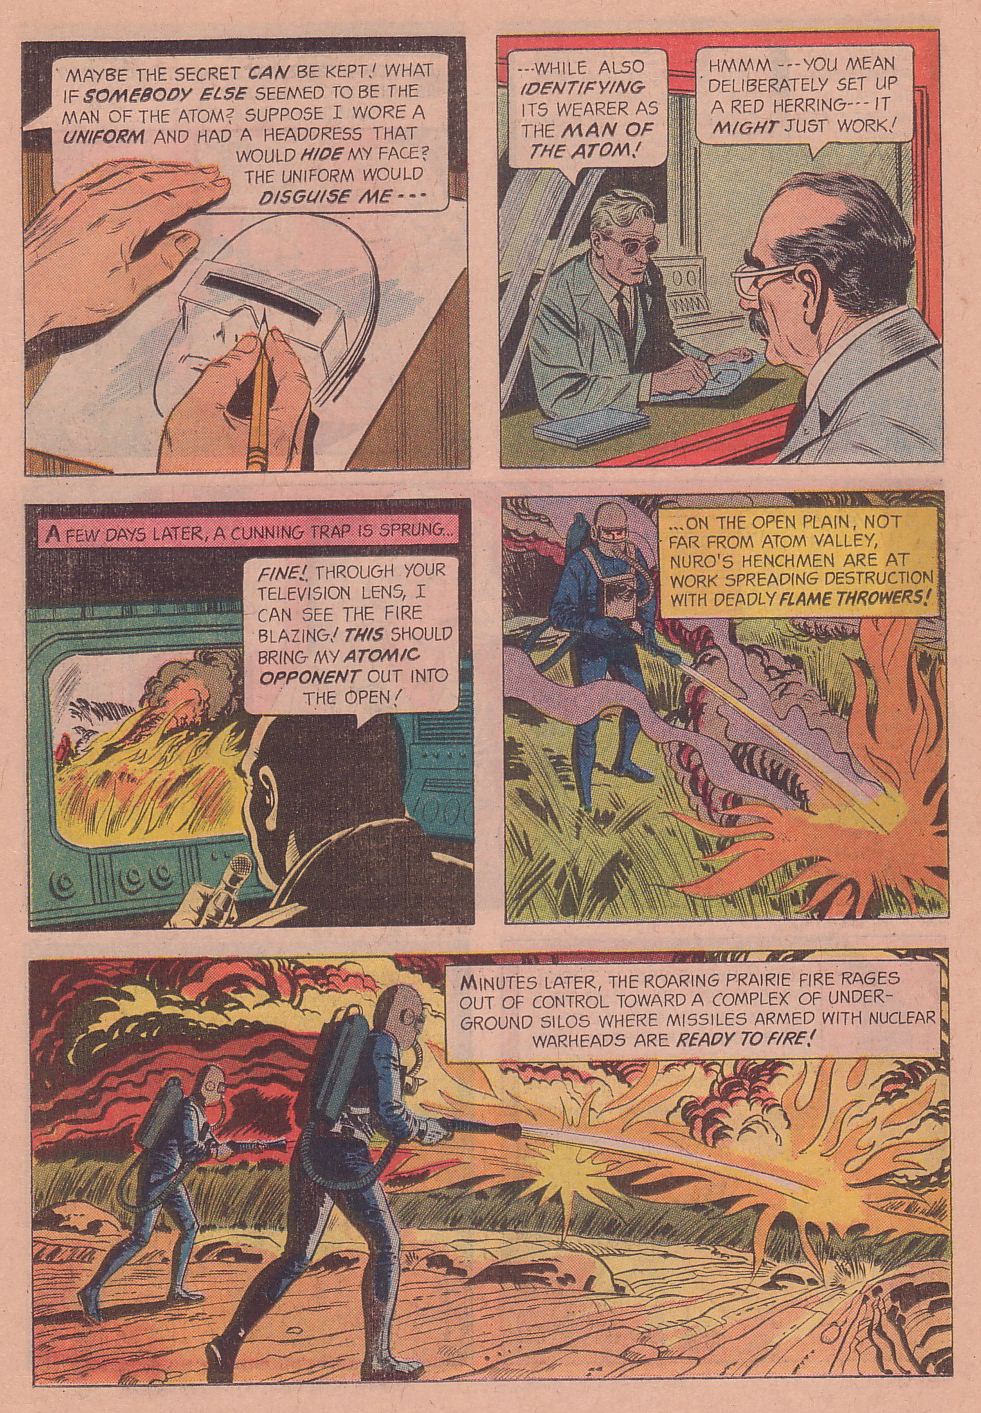 Doctor Solar, Man of the Atom (1962) Issue #5 #5 - English 26